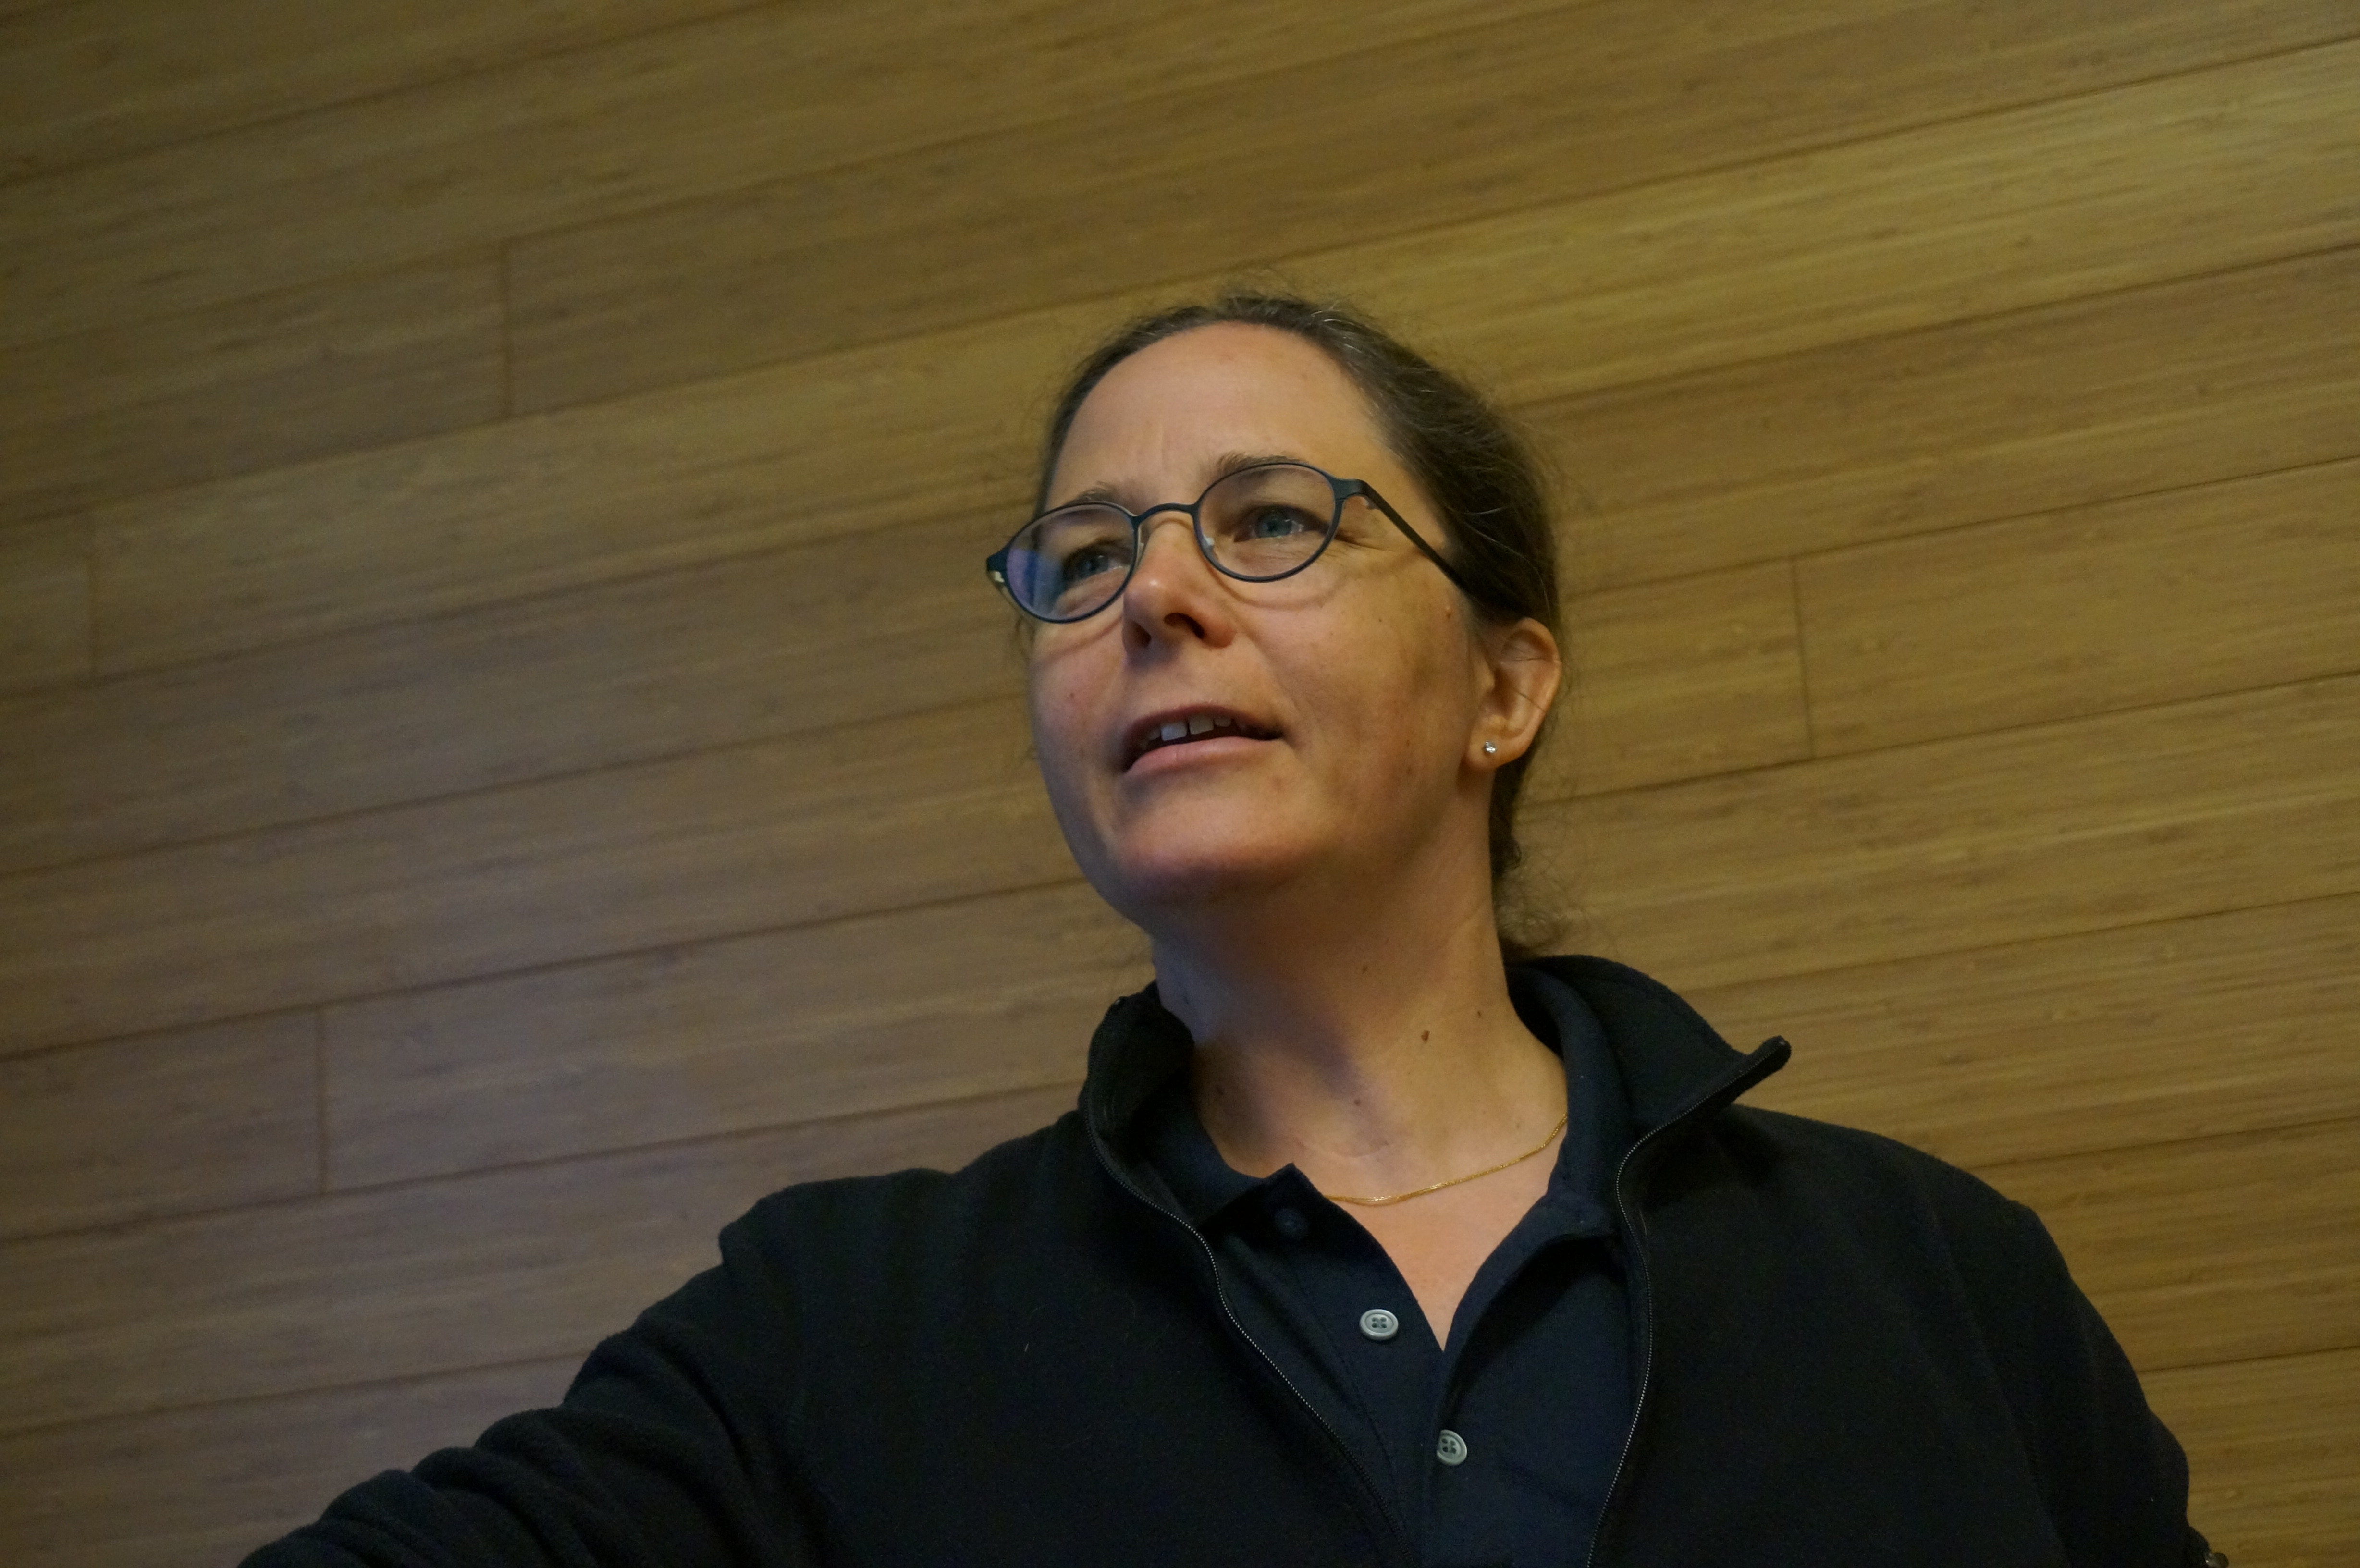 Annmarie Eldering is dressed in a black button-up shirt with a wood-paneled wall behind her, looking off to the side, a good-natured expression on her face. 